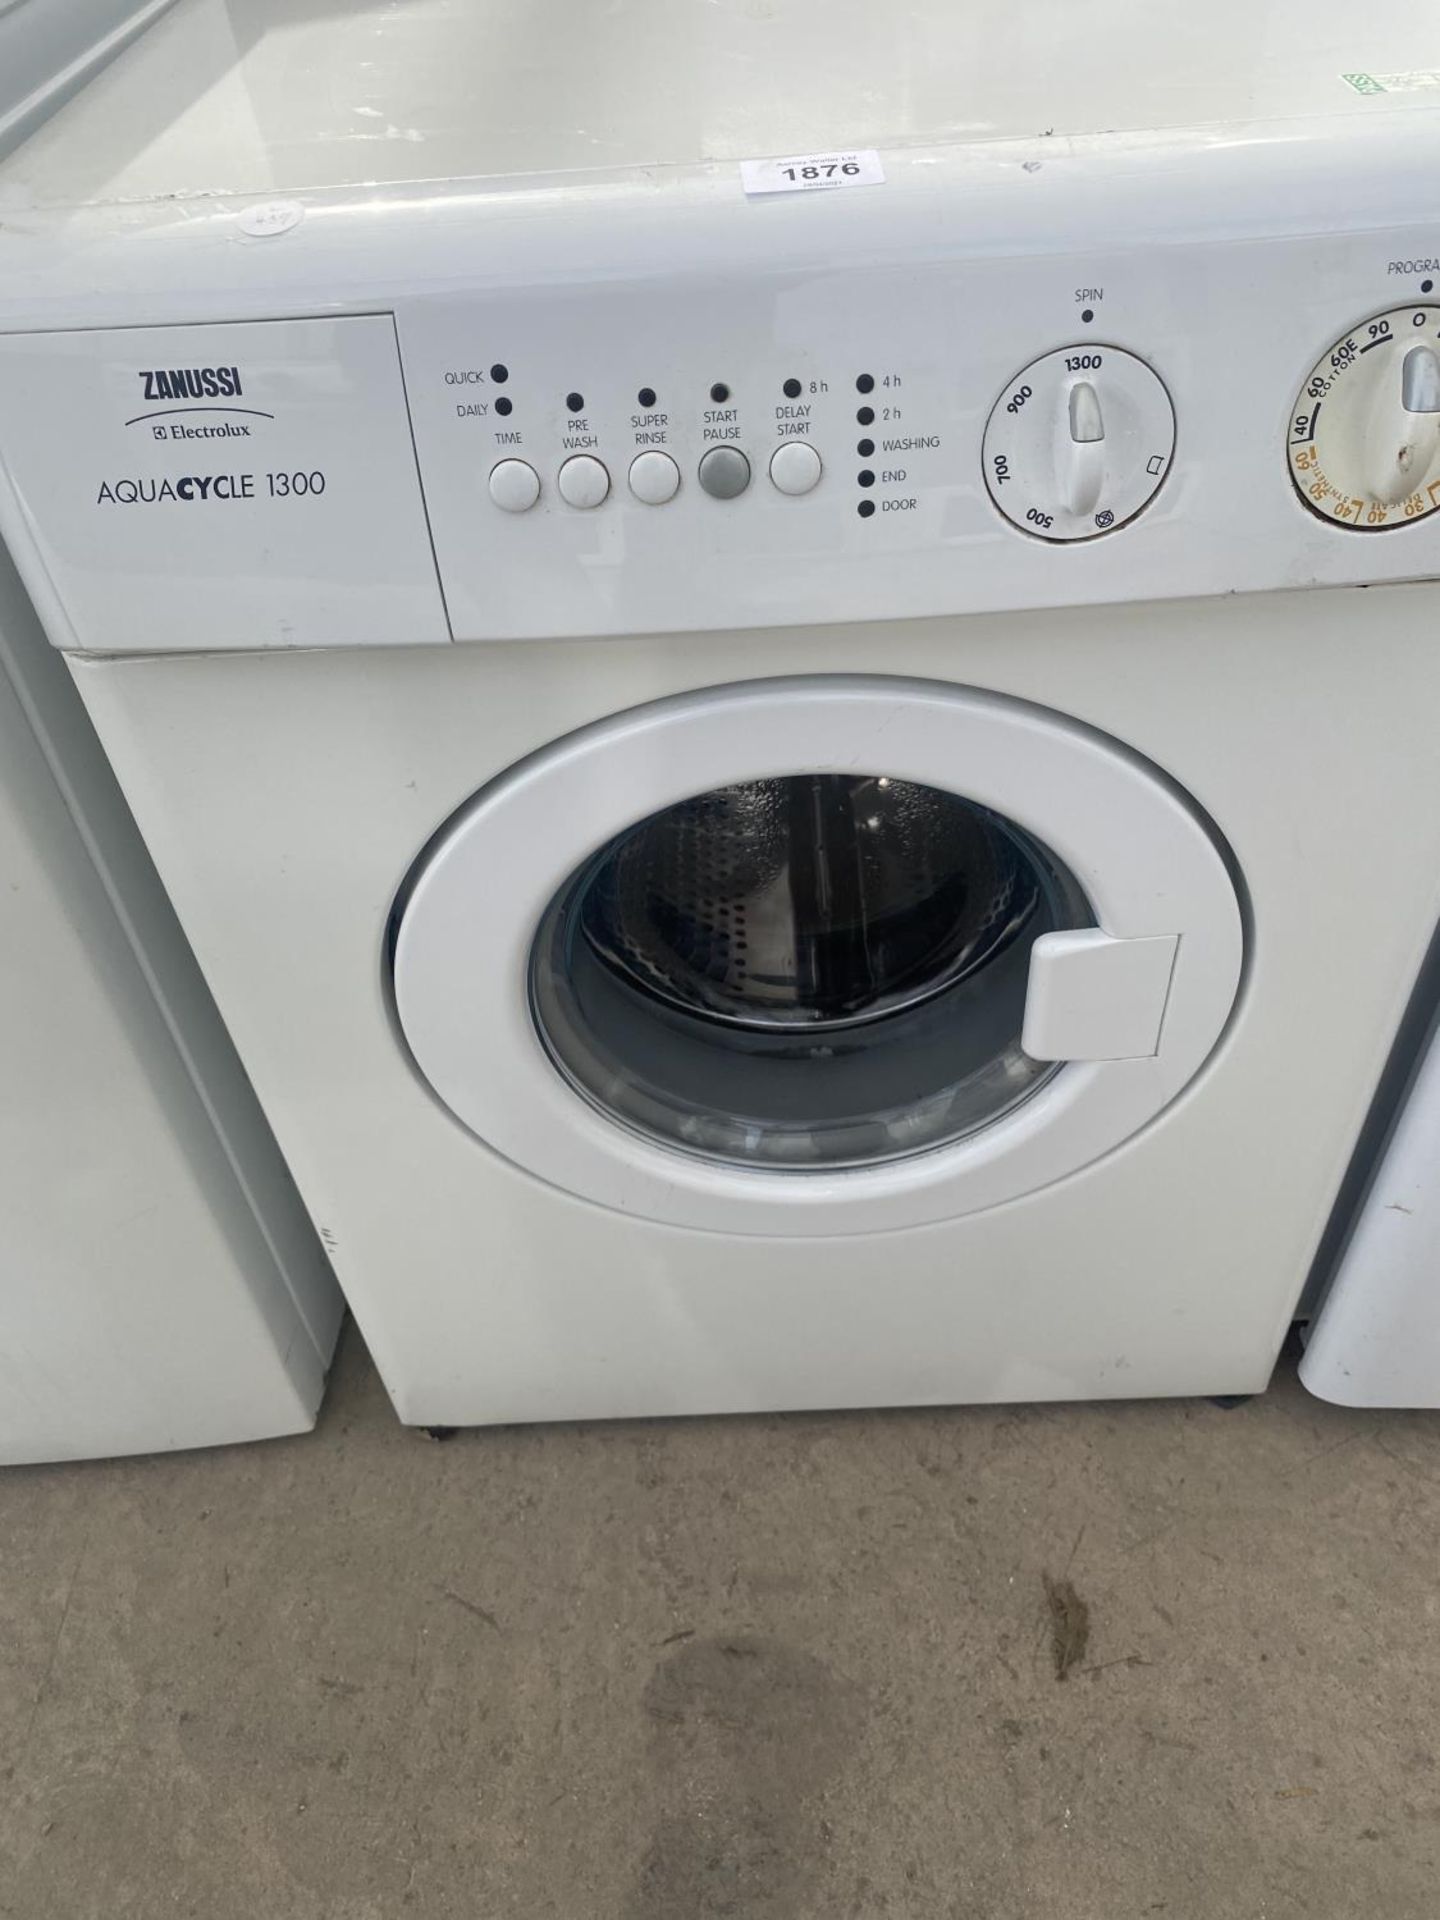 A WHITE ZANUSSI 3KG COMPACT WASHING MACHINE, PAT TEST, FUNCTION TEST AND SANITIZED BUT NO WARRANTY - Image 3 of 4